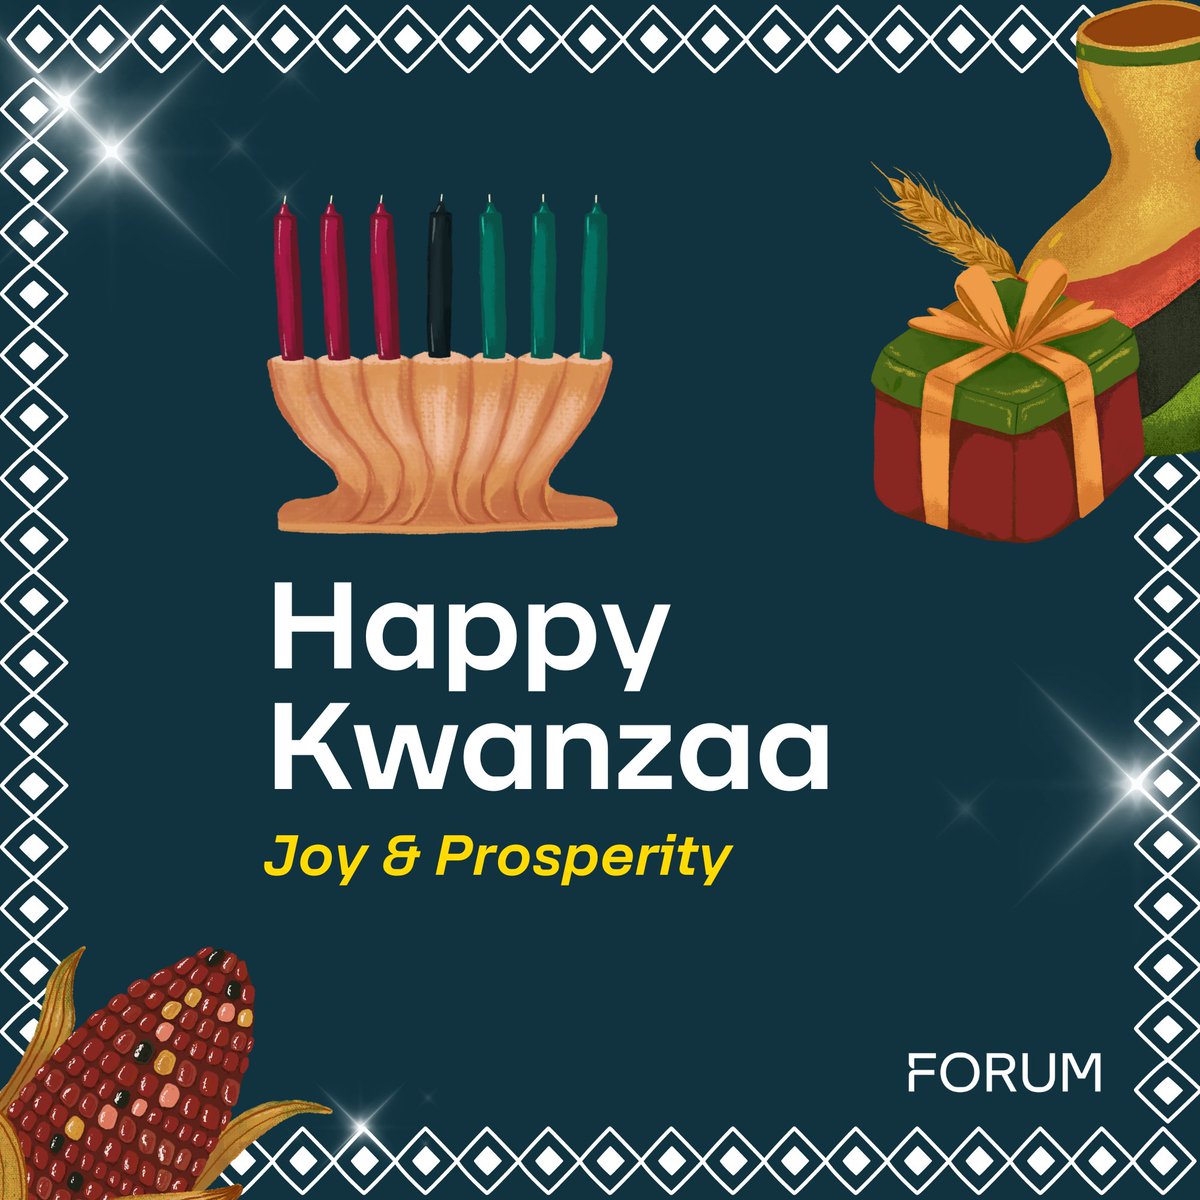 Kwanzaa celebrates the values of unity, self-determination, collective responsibility, cooperative economics, purpose, creativity and faith. If you celebrate this holiday, FORUM would like to wish you and yours a bright and meaningful Kwanzaa. #Kwanzaa #FORUMgovcon